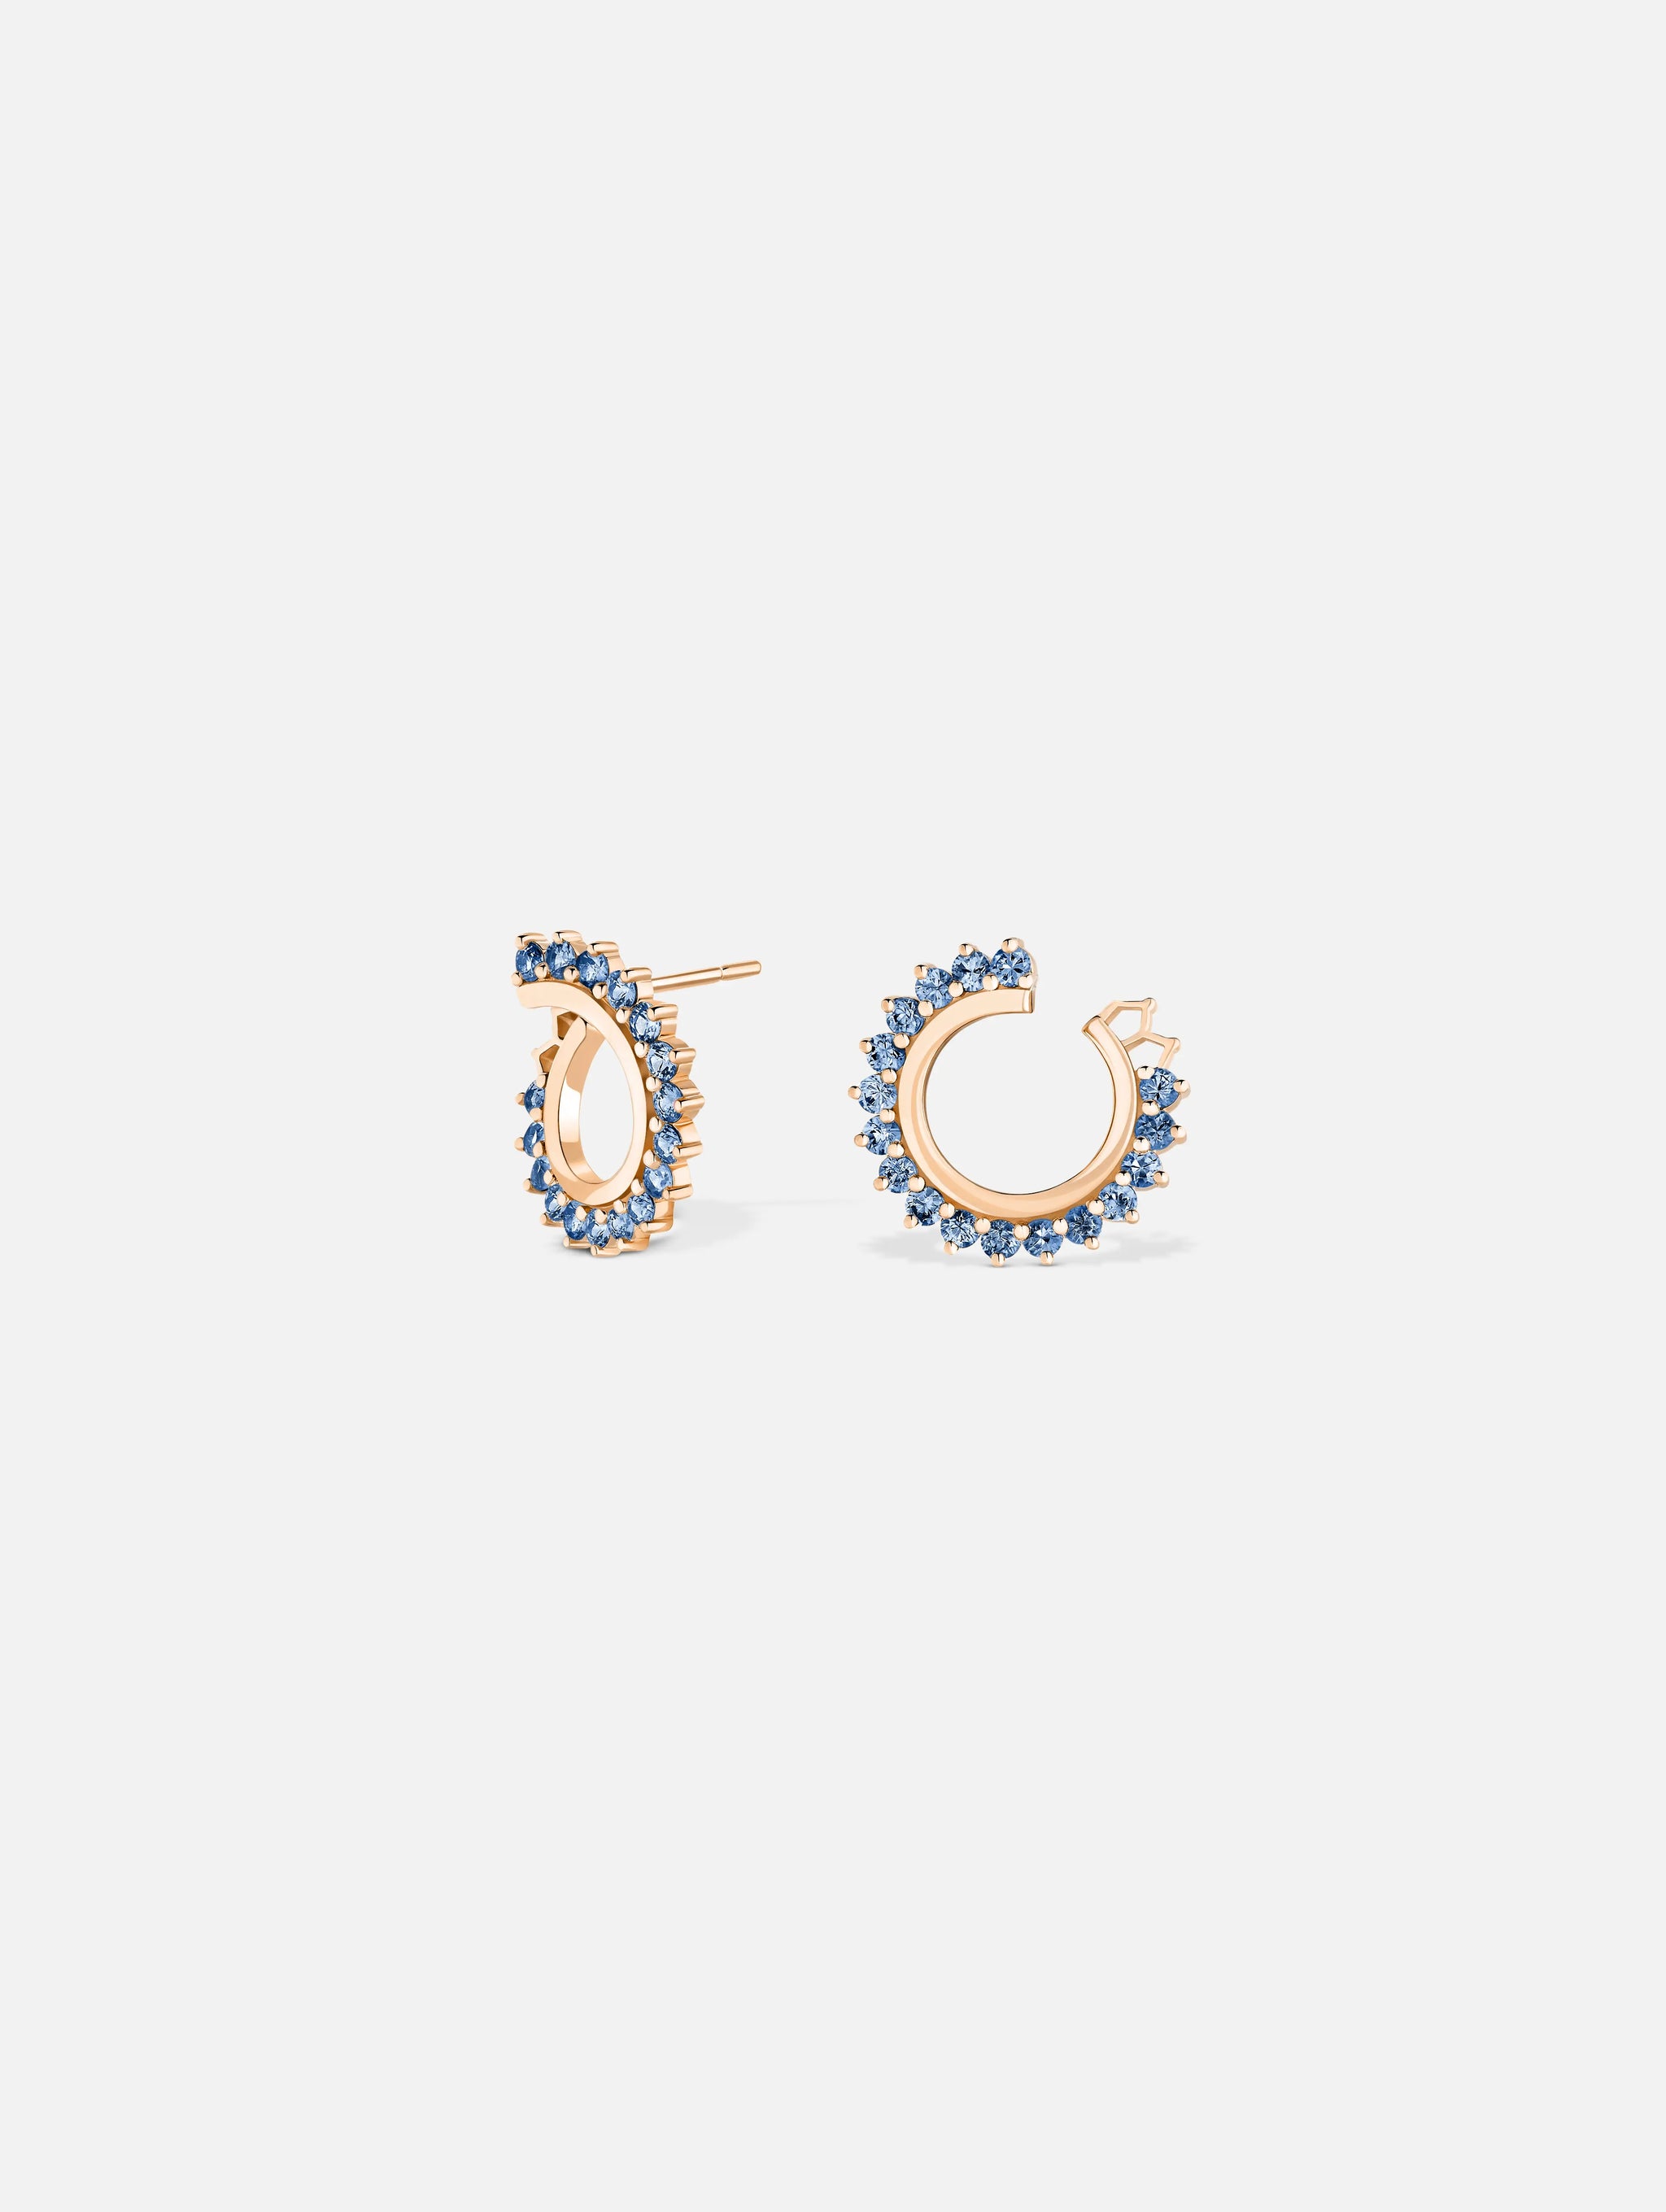 Blue Sapphire Earrings in Rose Gold - 1 - Nouvel Heritage